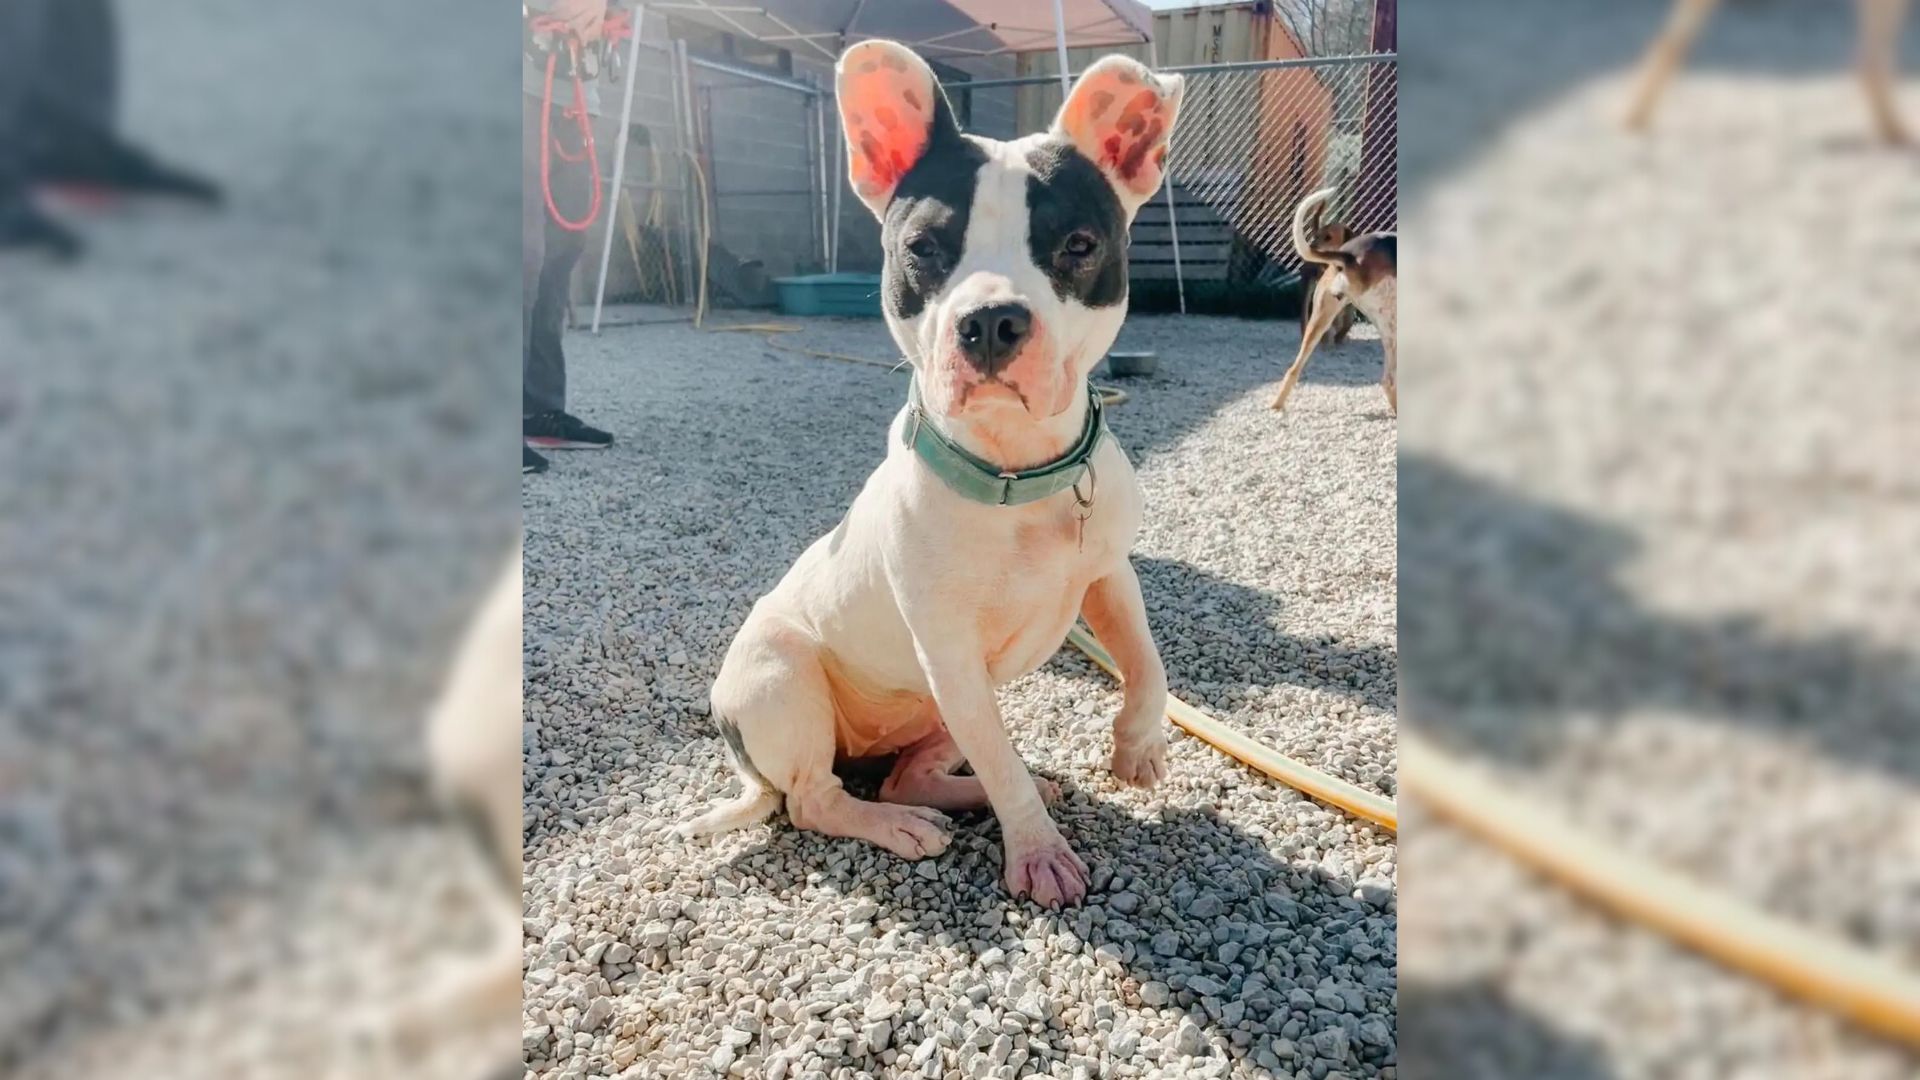 Sweet Pup Who Was Returned To The Shelter Numerous Times Can’t Stop Shaking In Her Kennel